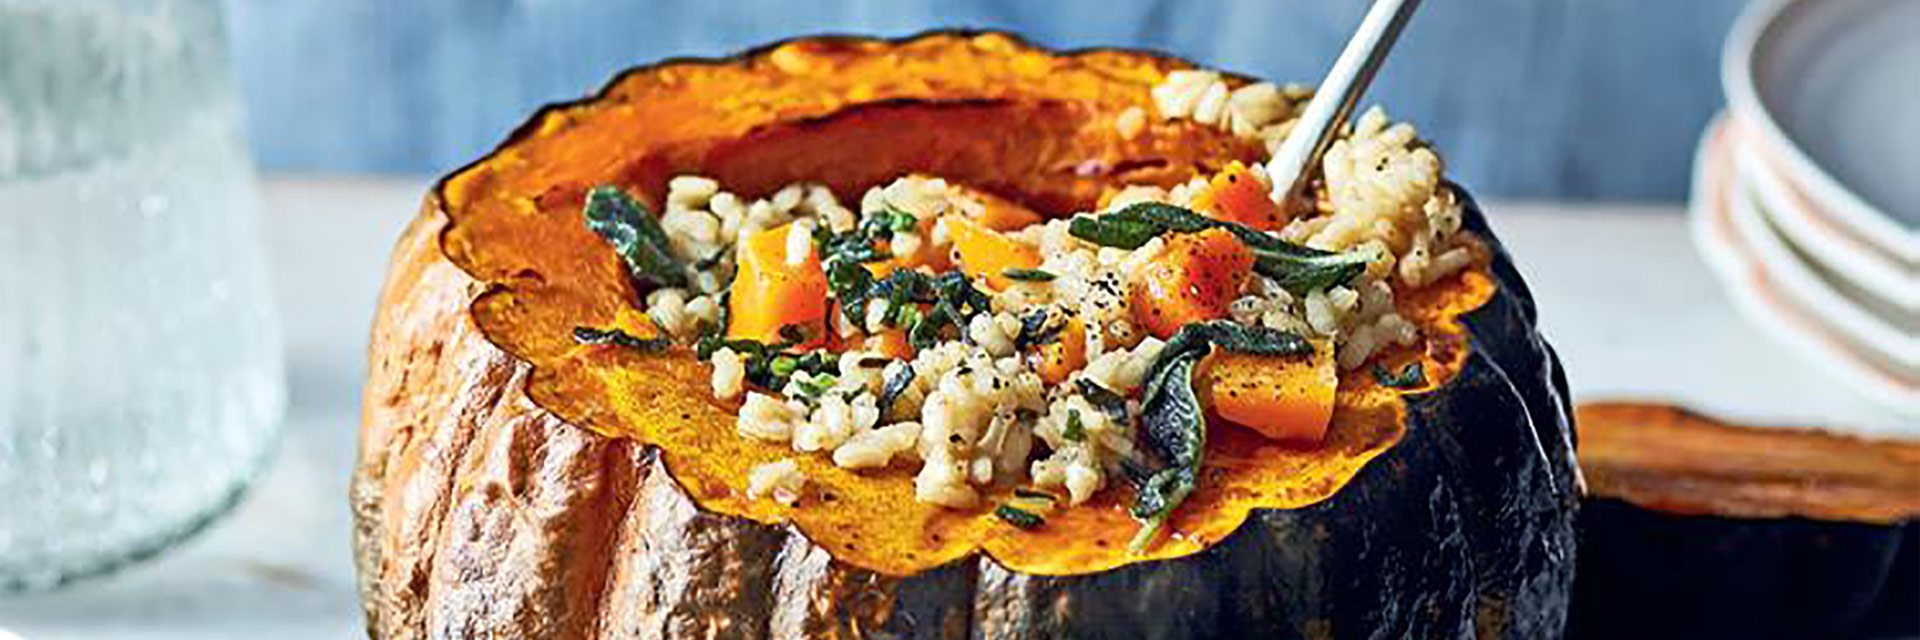 Roasted Risotto Pumpkin Pie